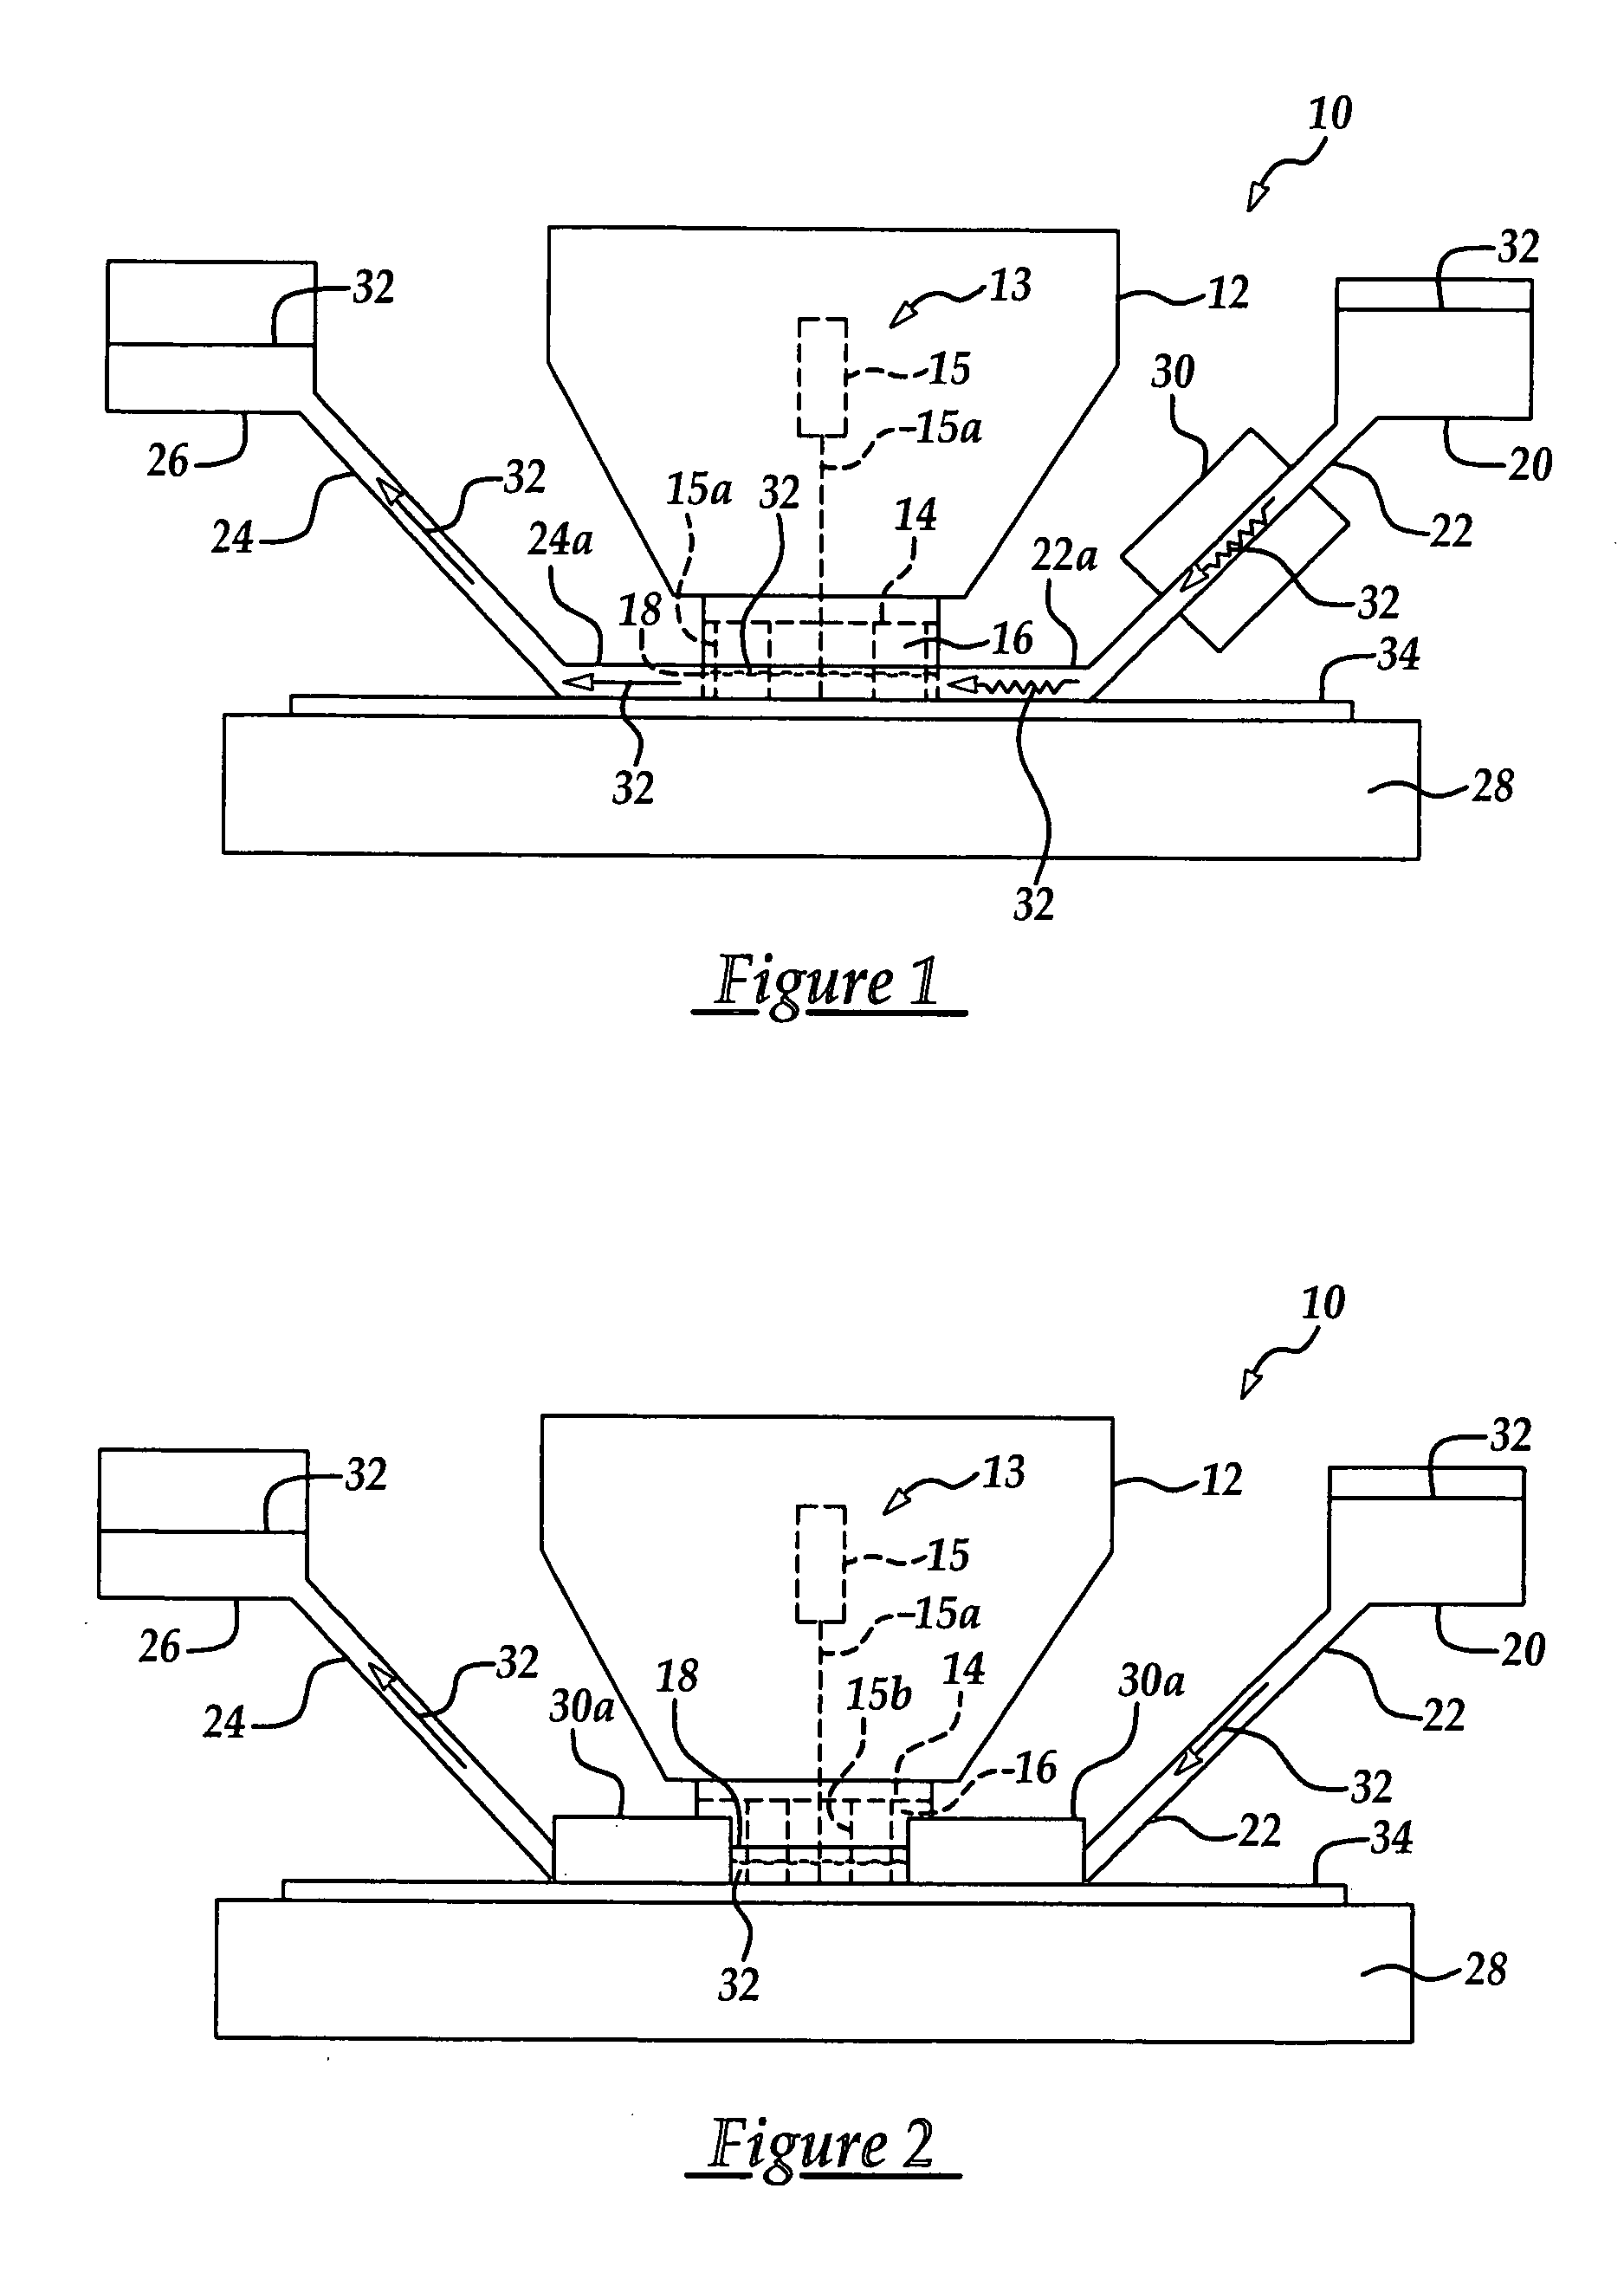 Megasonic immersion lithography exposure apparatus and method